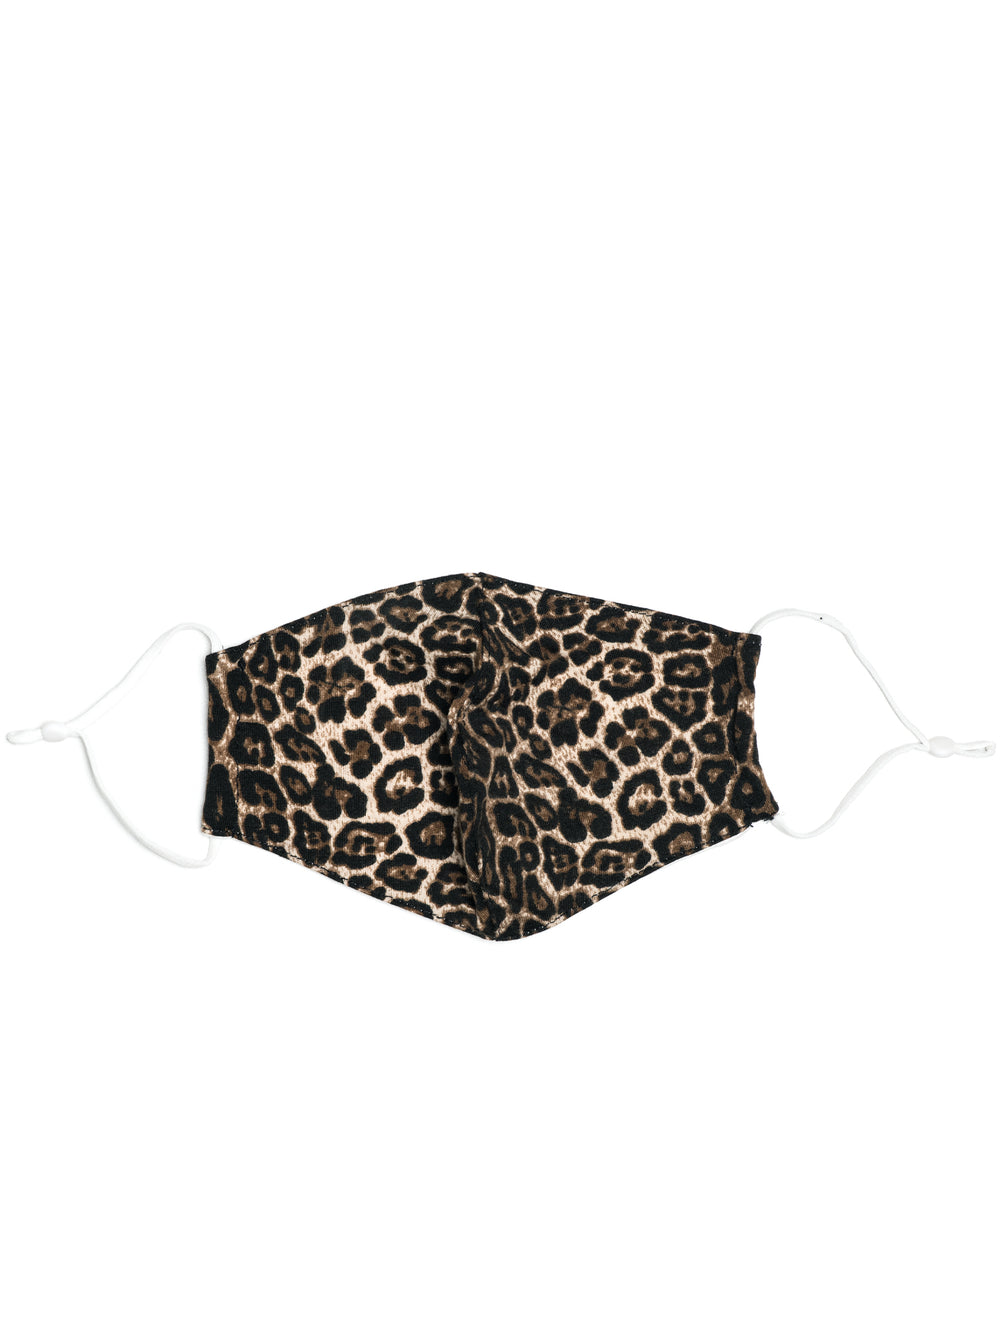 KW FASHION CORP LEOPARD PRINT MASK - CAMEL - CLEARANCE